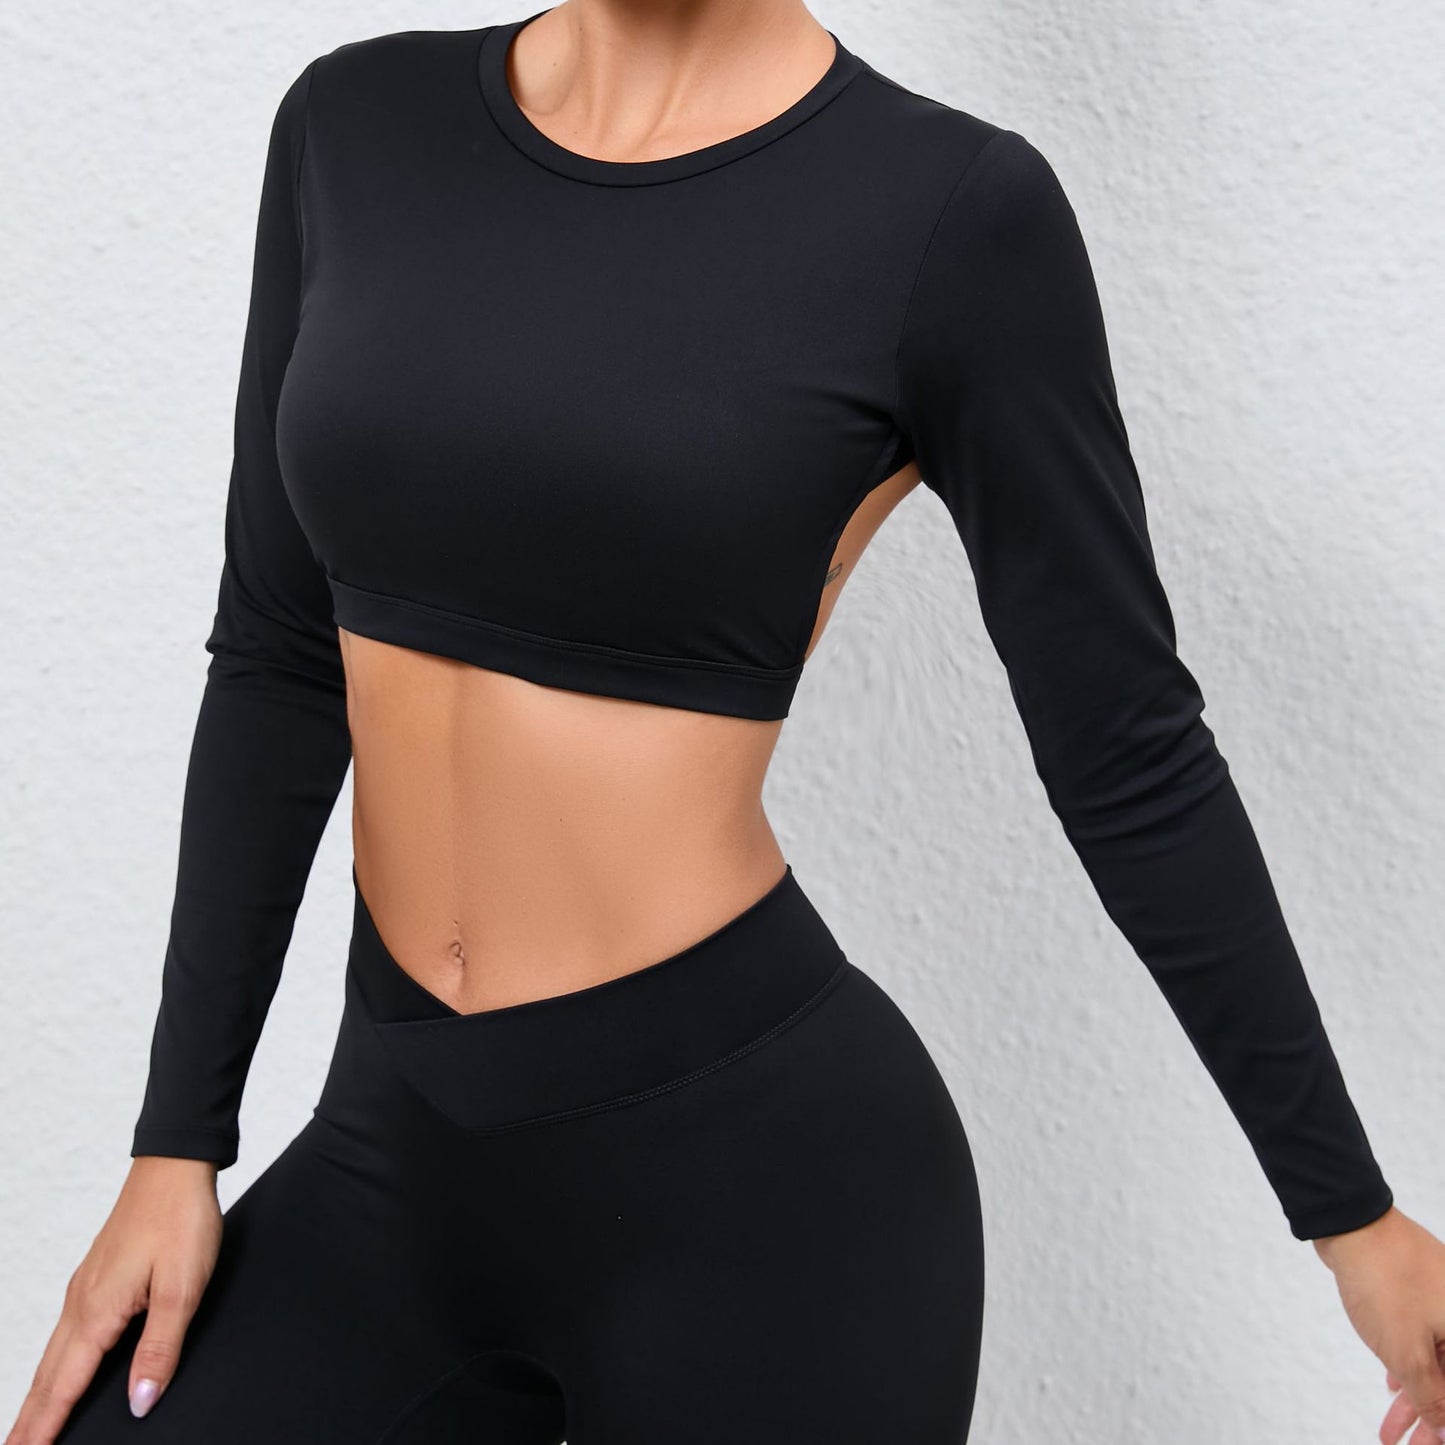 BamBam Women Backless Sports Running Quick-Drying Yoga Wear with Bra Pad Long Sleeve Top - BamBam